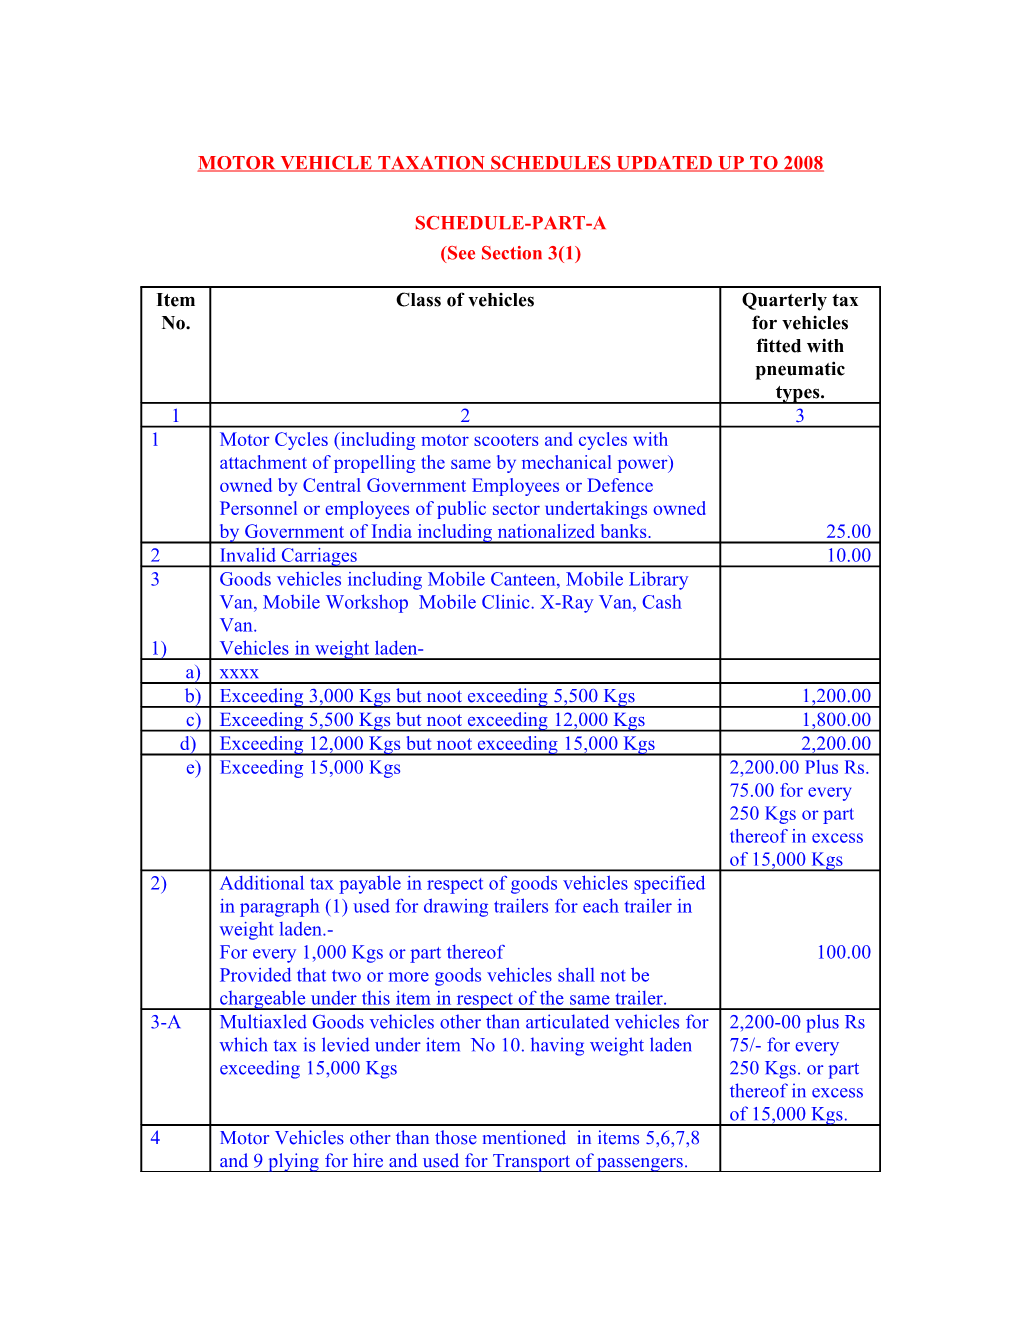 Motor Vehicle Taxation Scheduled Updated up to 2007